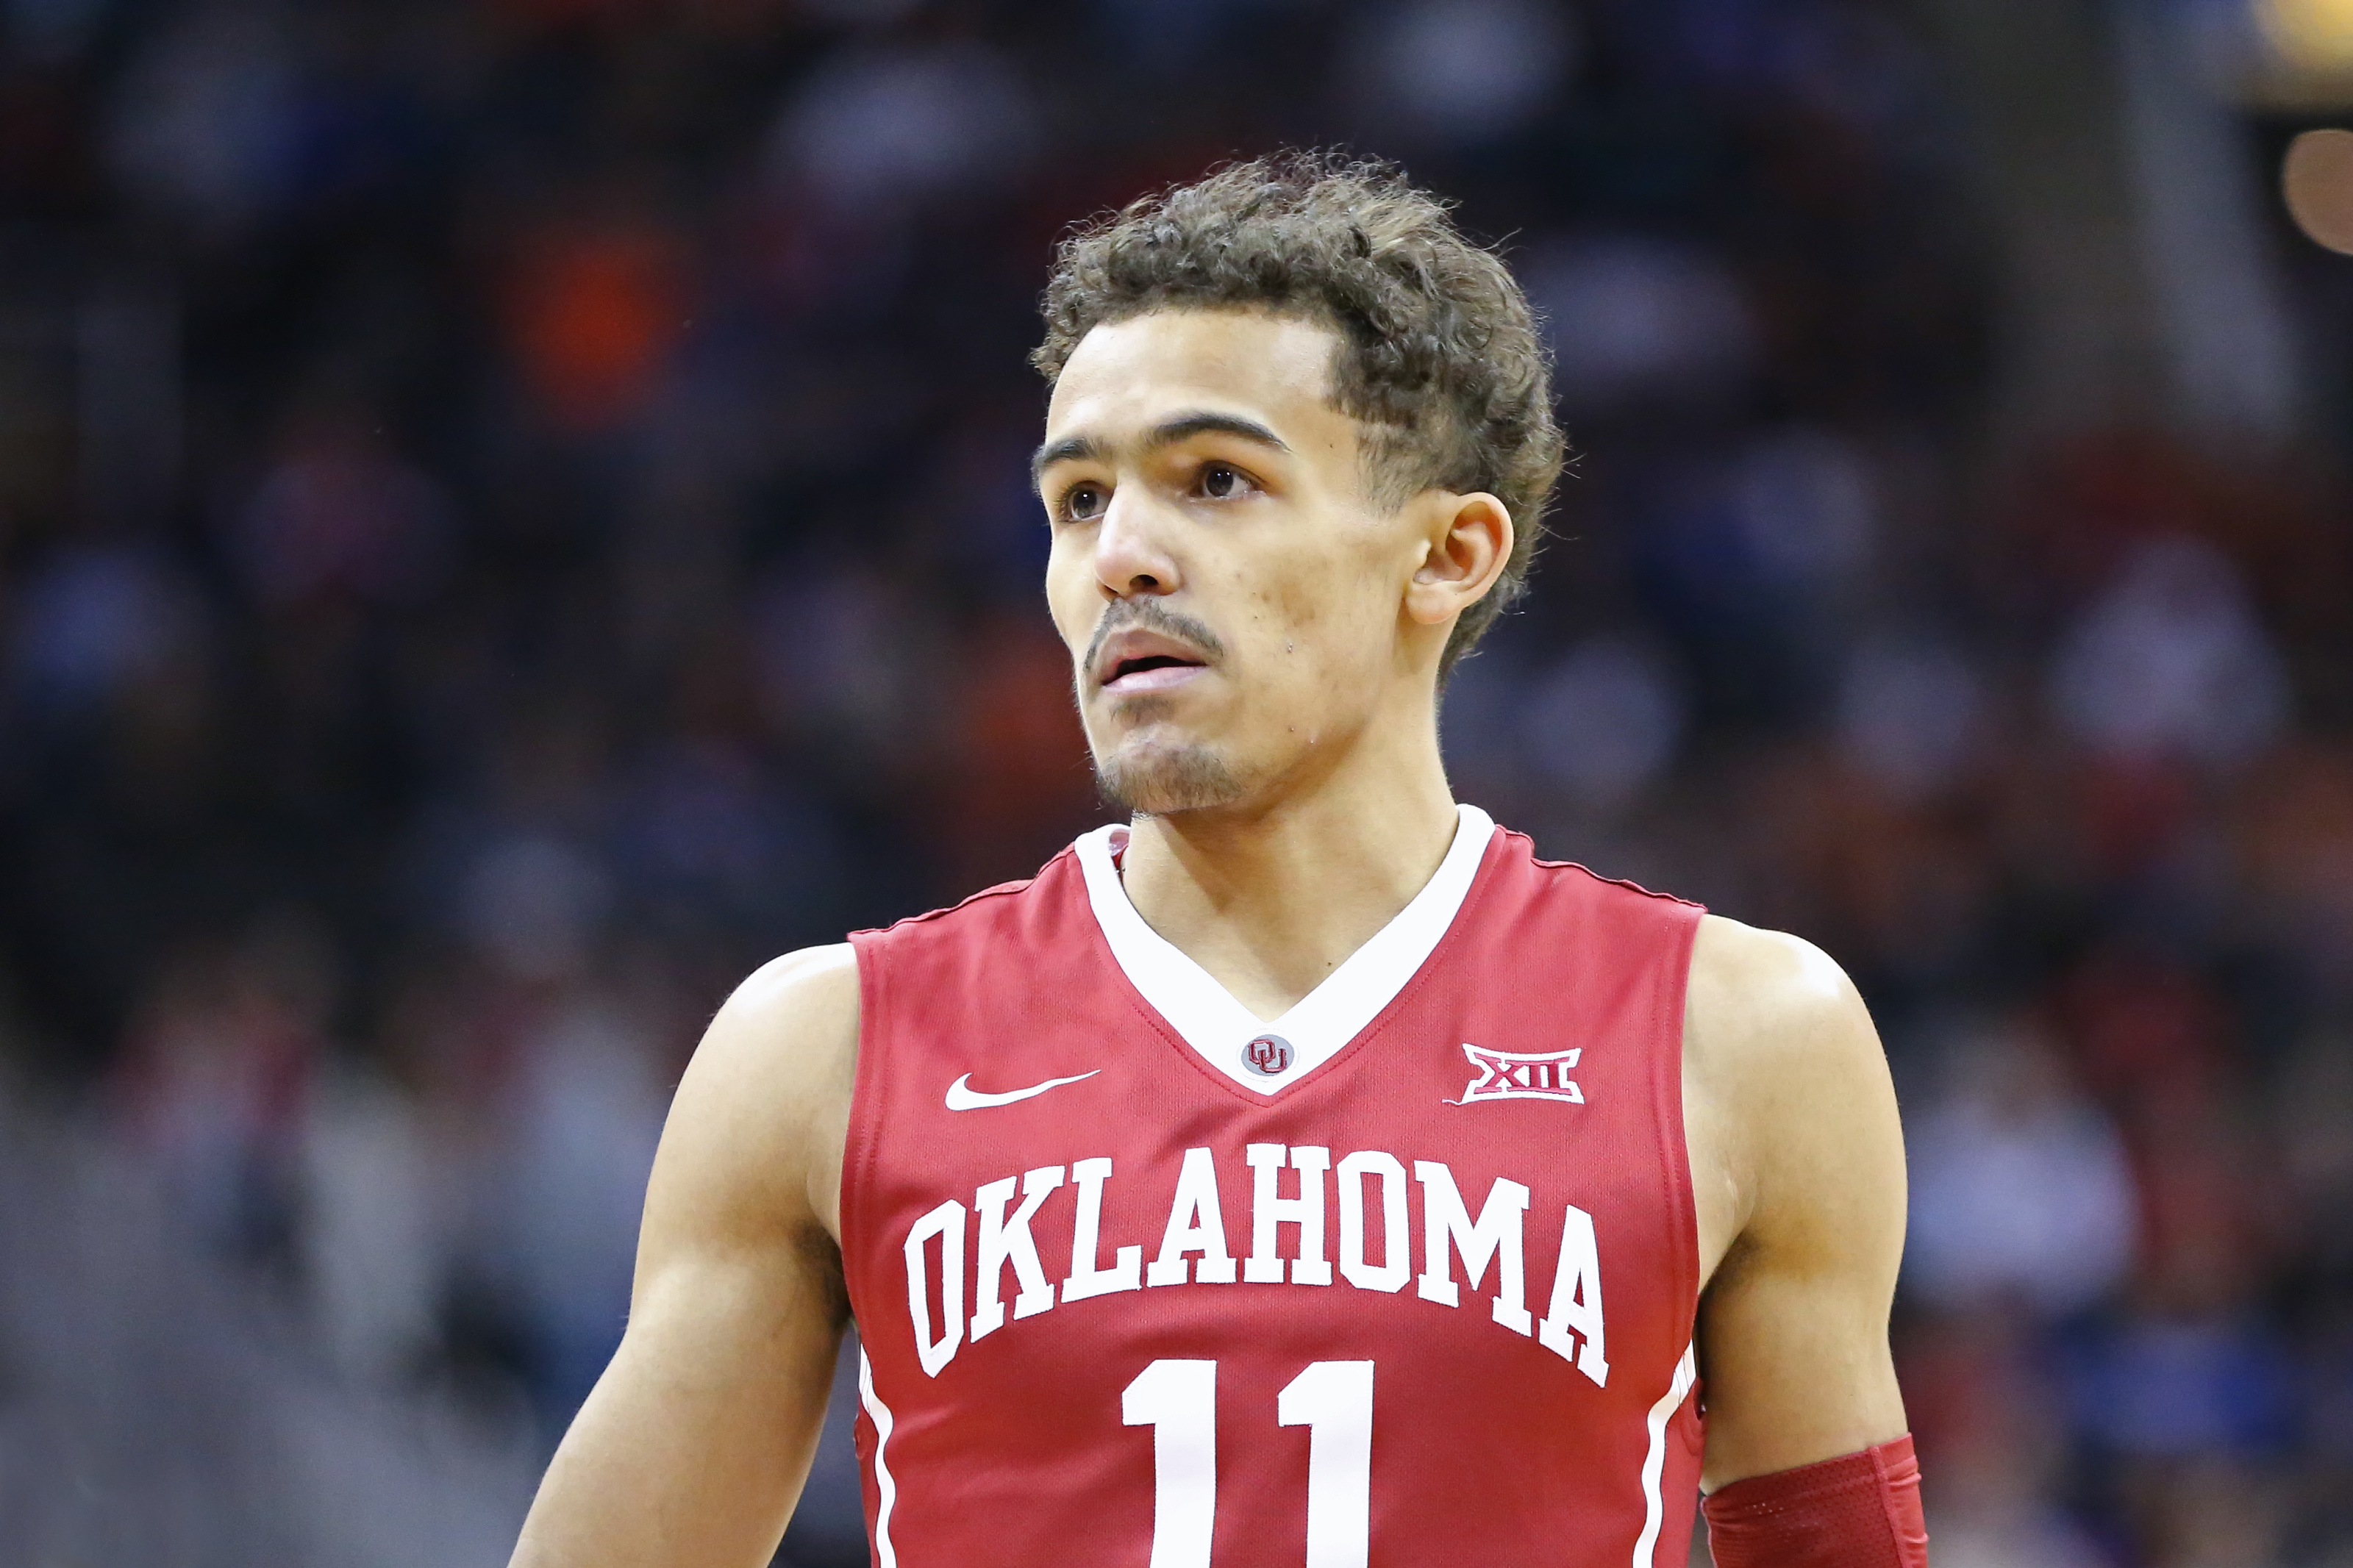 2018 NBA Draft scouting report: Trae Young - Peachtree Hoops